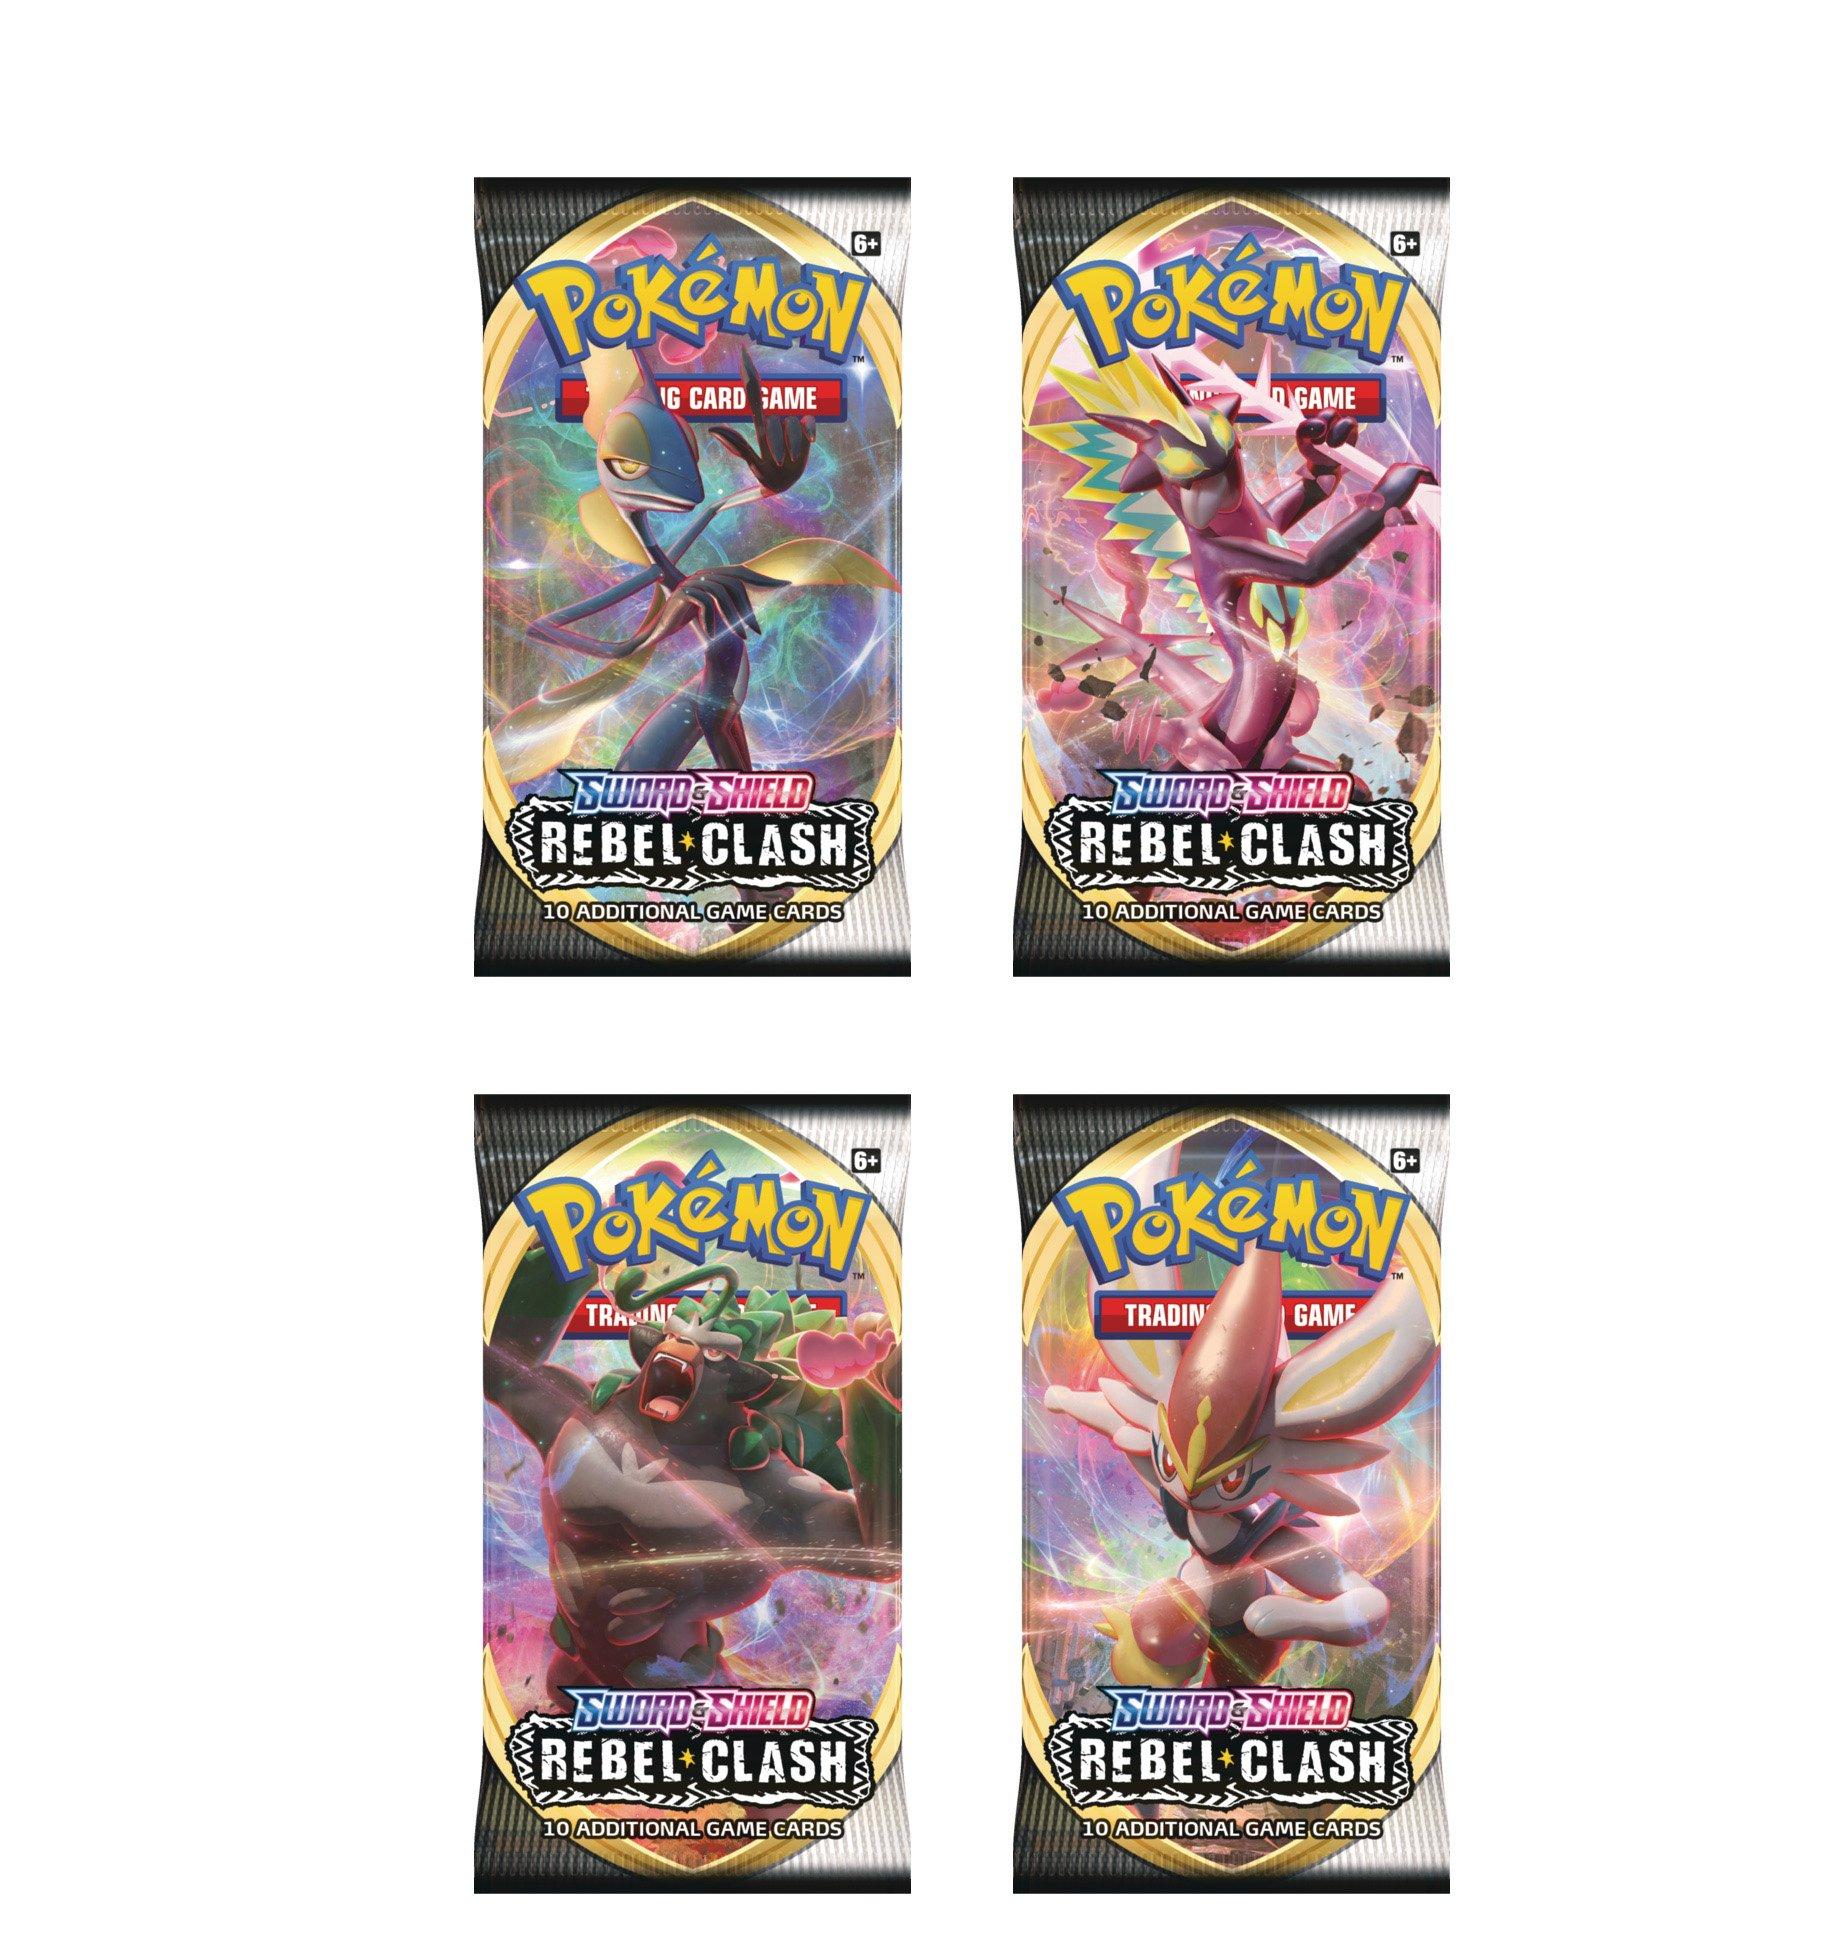 Pokemon Trading Card Game: Sword and Shield Rebel Clash Booster Pack